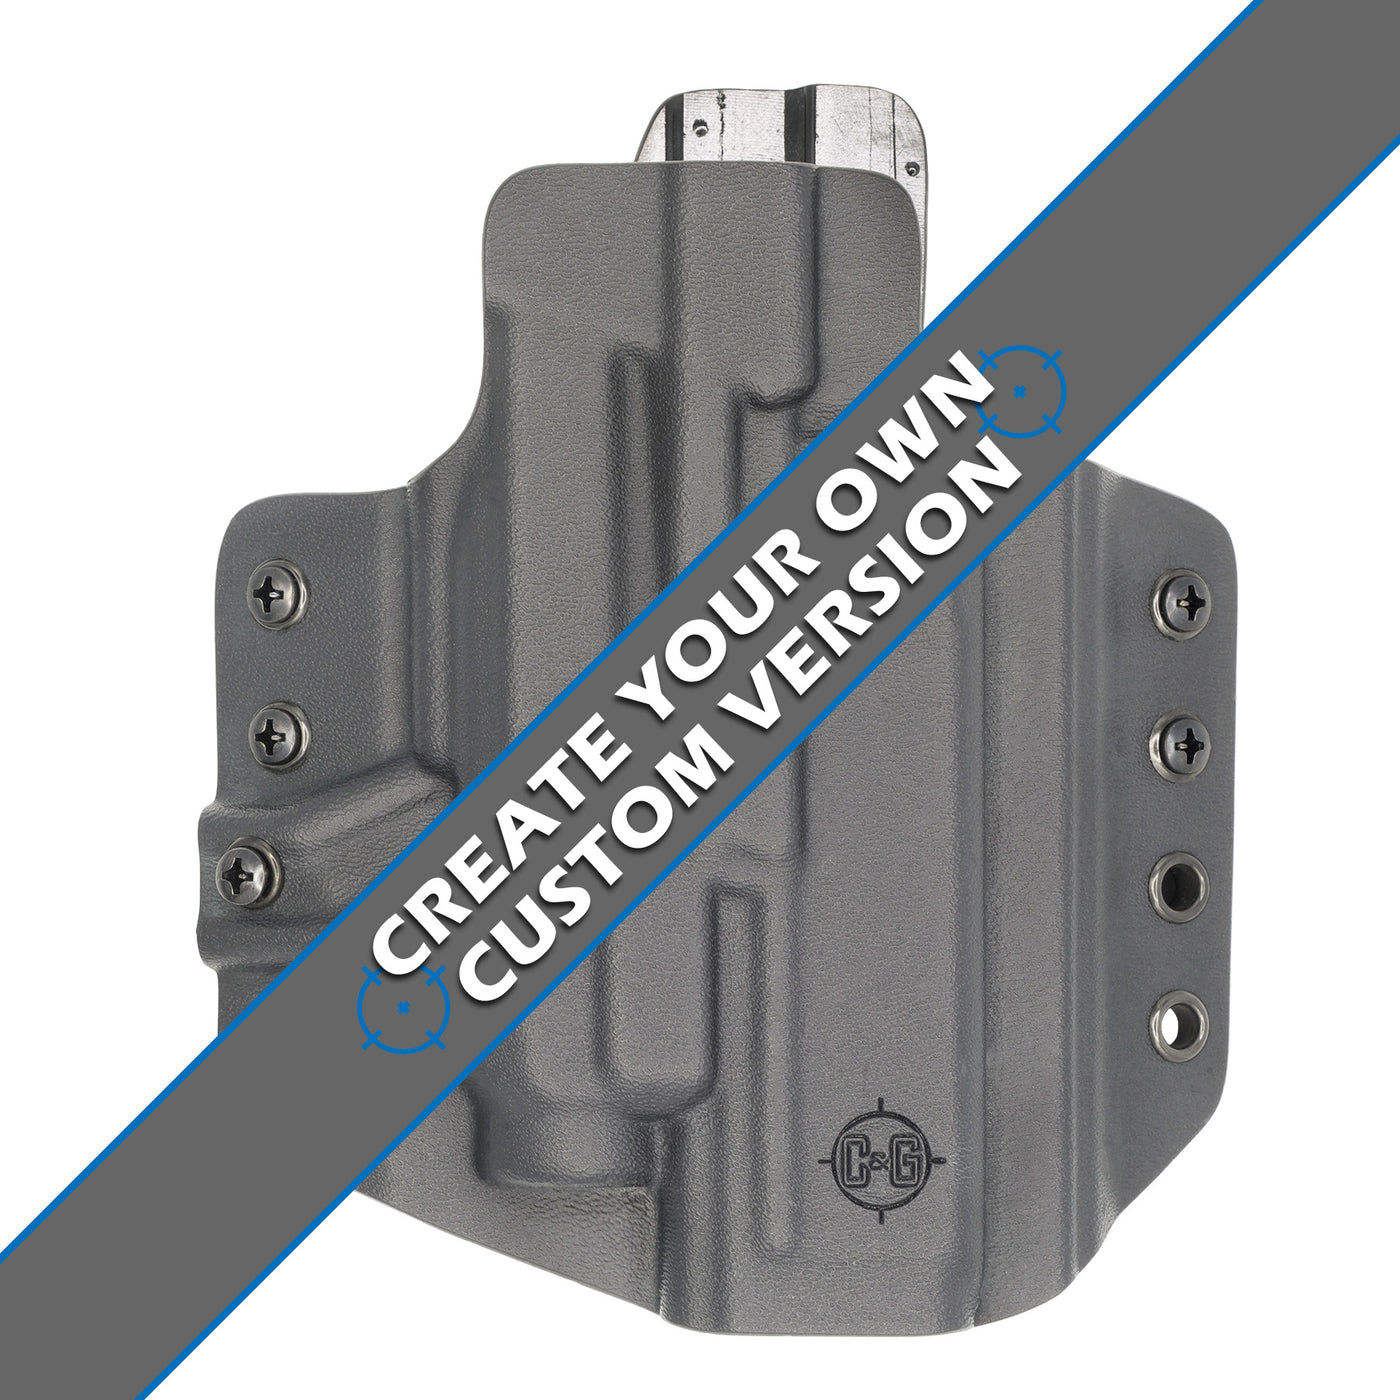 C&G Holsters custom OWB Tactical CZ P10/c streamlight tlr7/a